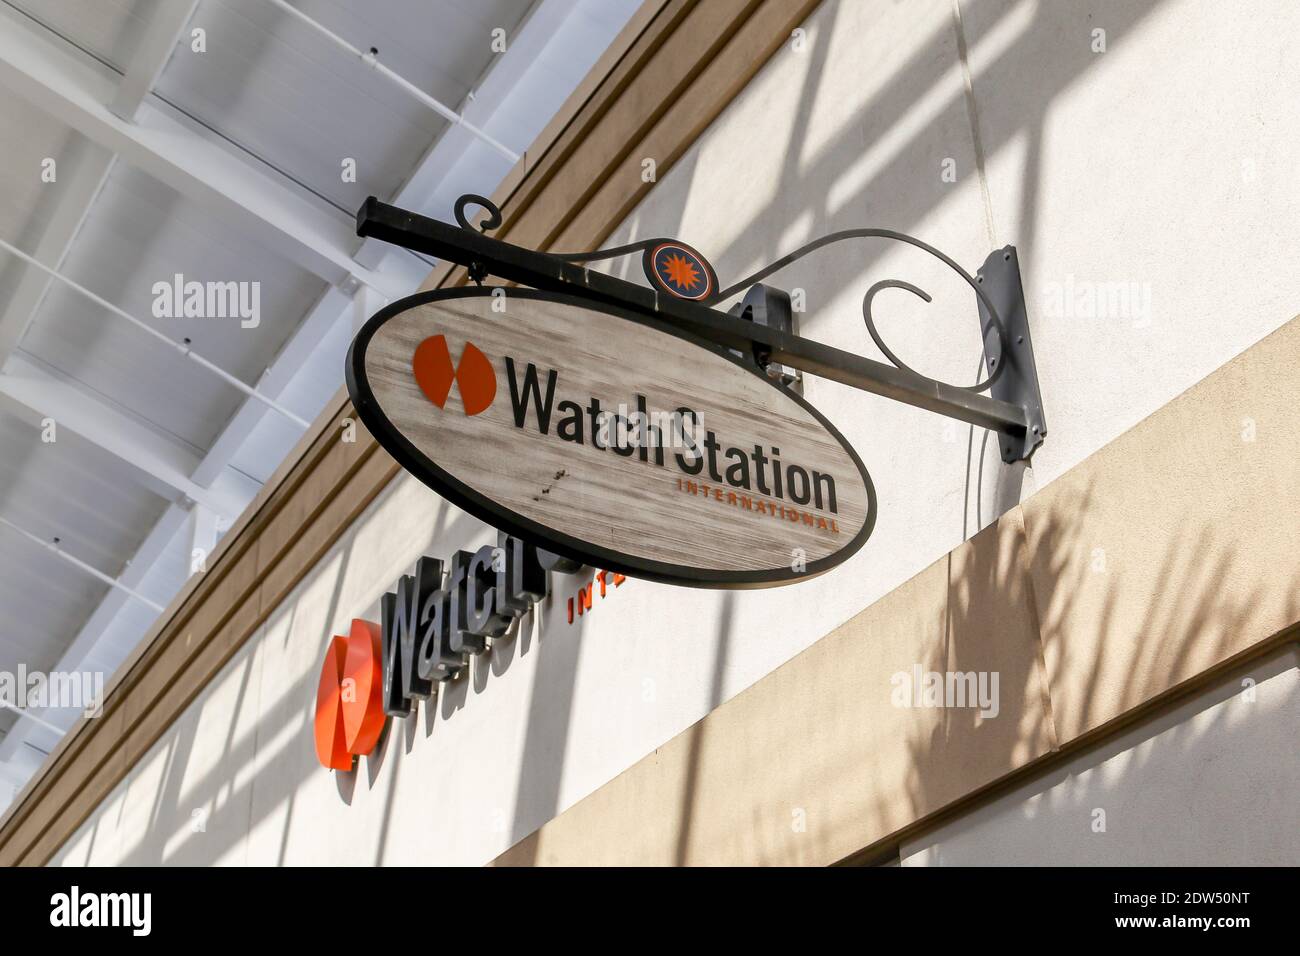 Watch Station store sign at Orlando Premium outlets mall in Florida, USA. Stock Photo